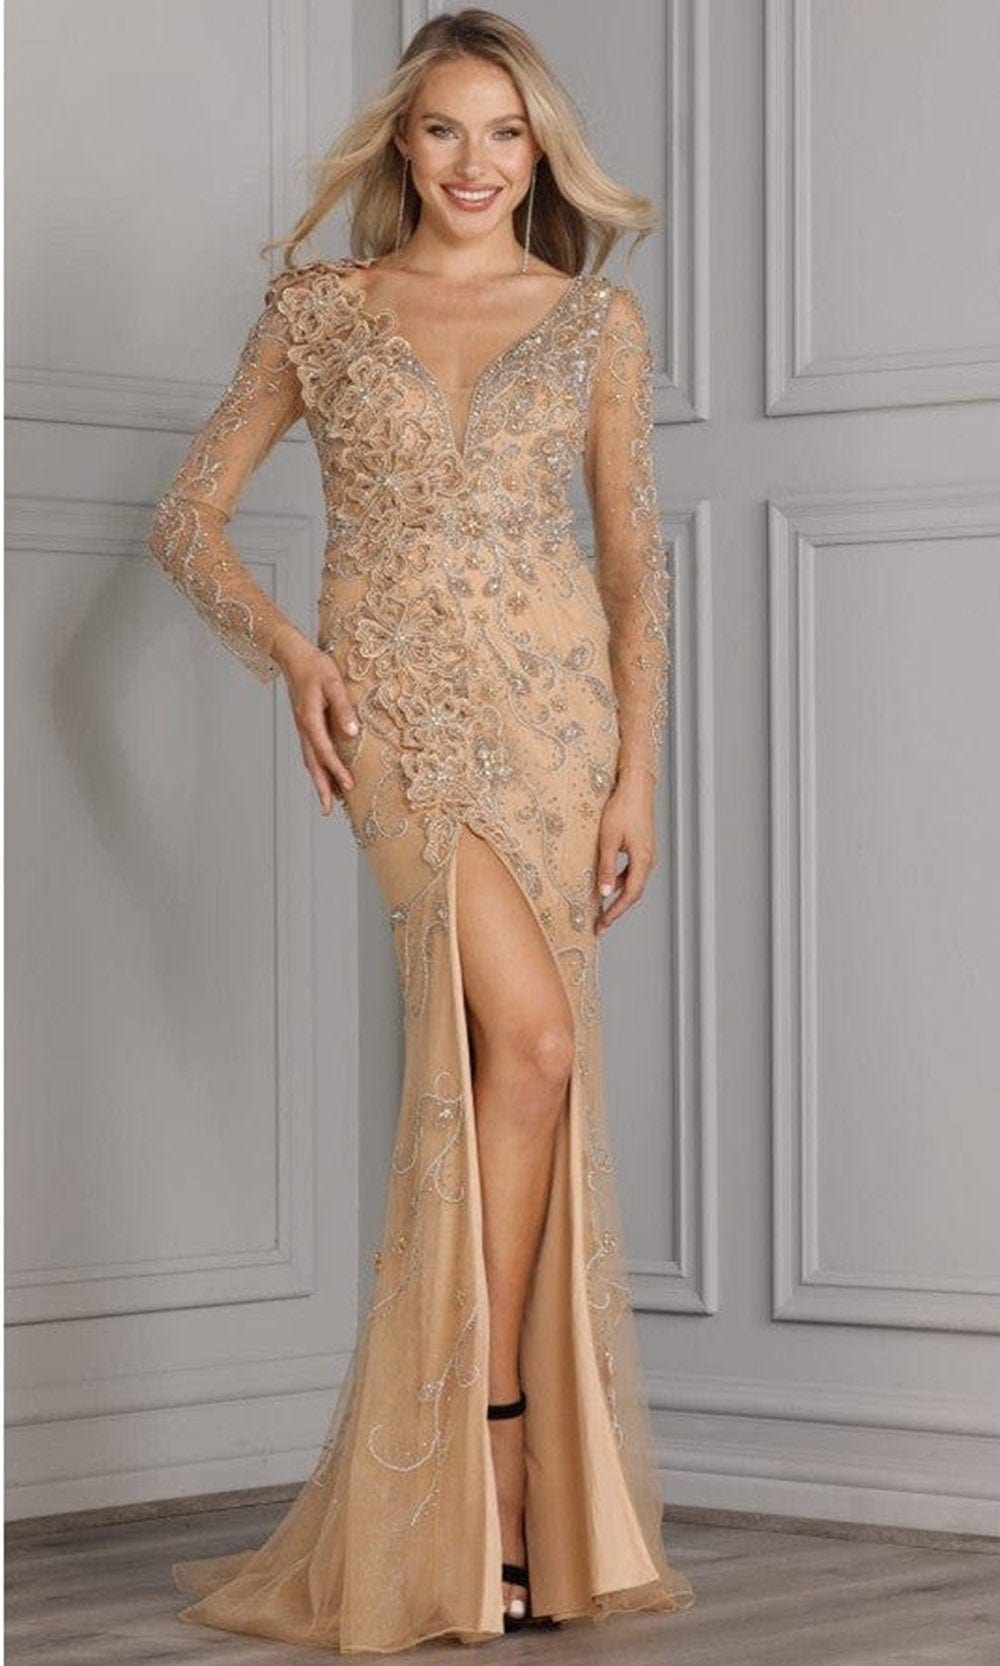 Terani Couture - 2111GL5023 Plunging V-Neck Appliqued Gown Special Occasion Dress 00 / Nude